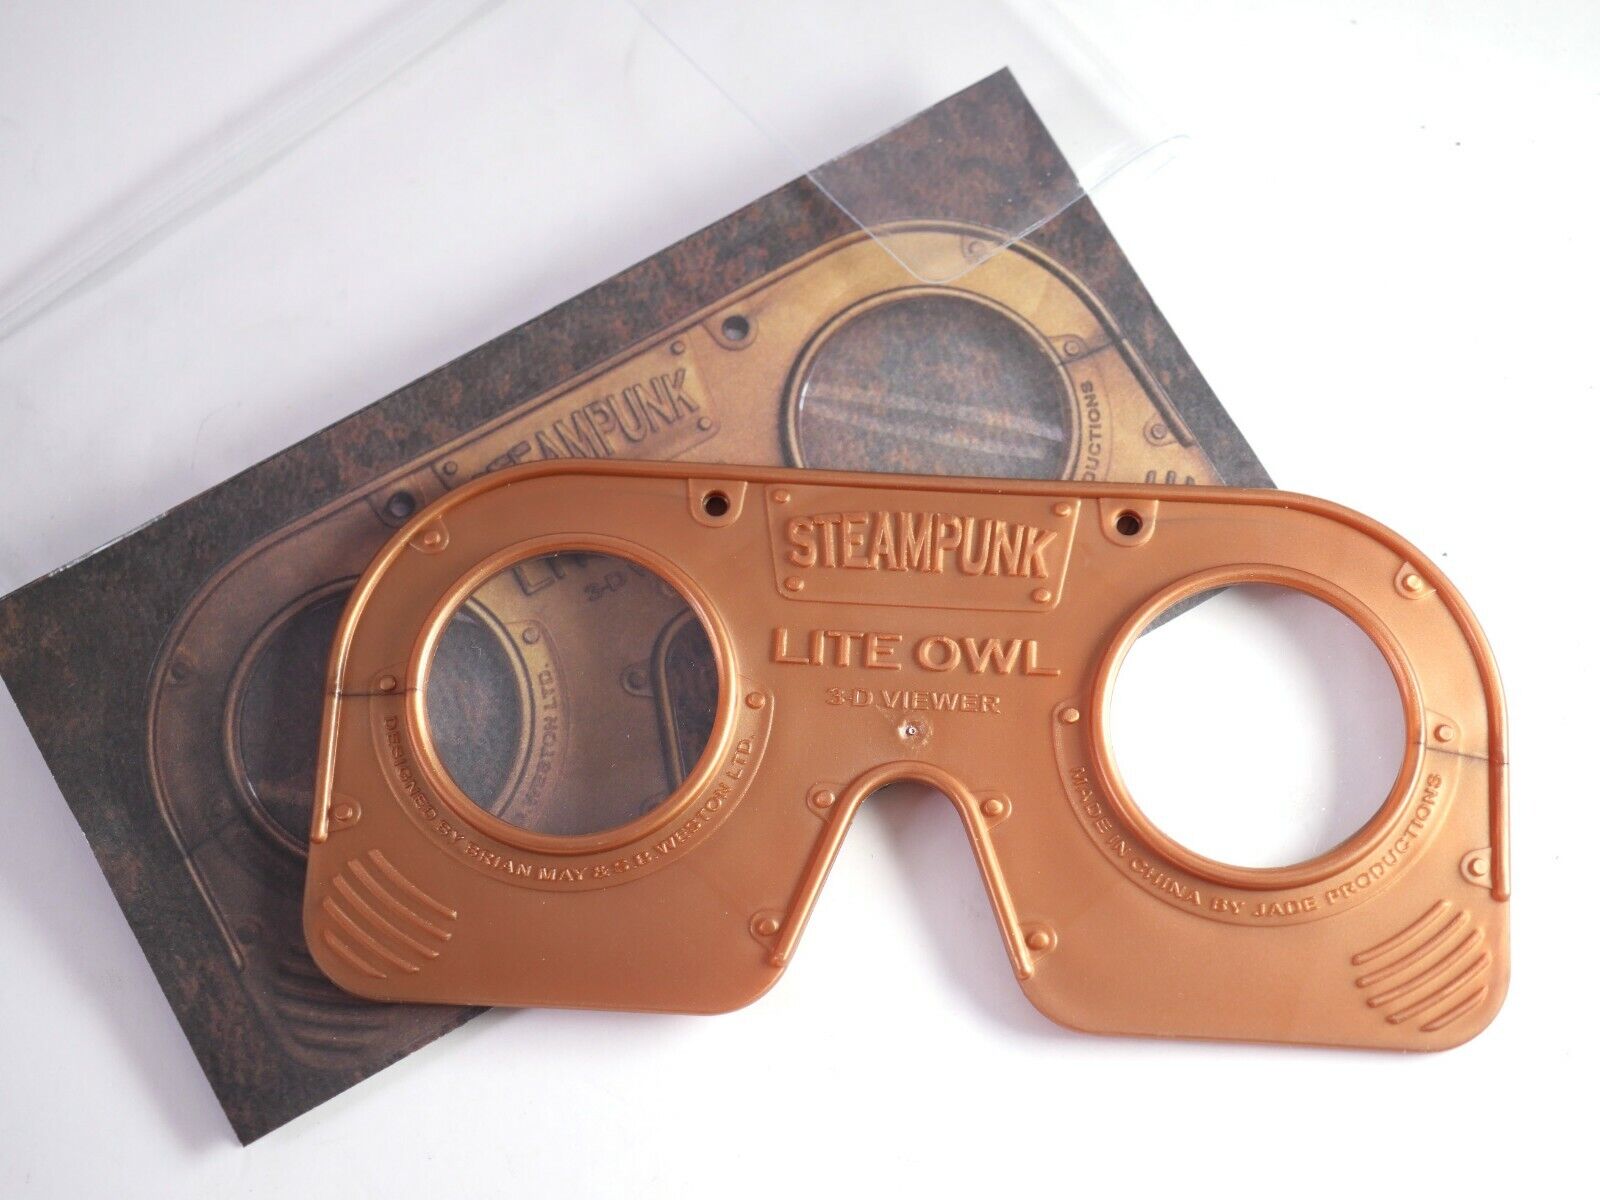 Steampunk Lite OWL Stereoscope 3D print viewer by Brian May - Must see